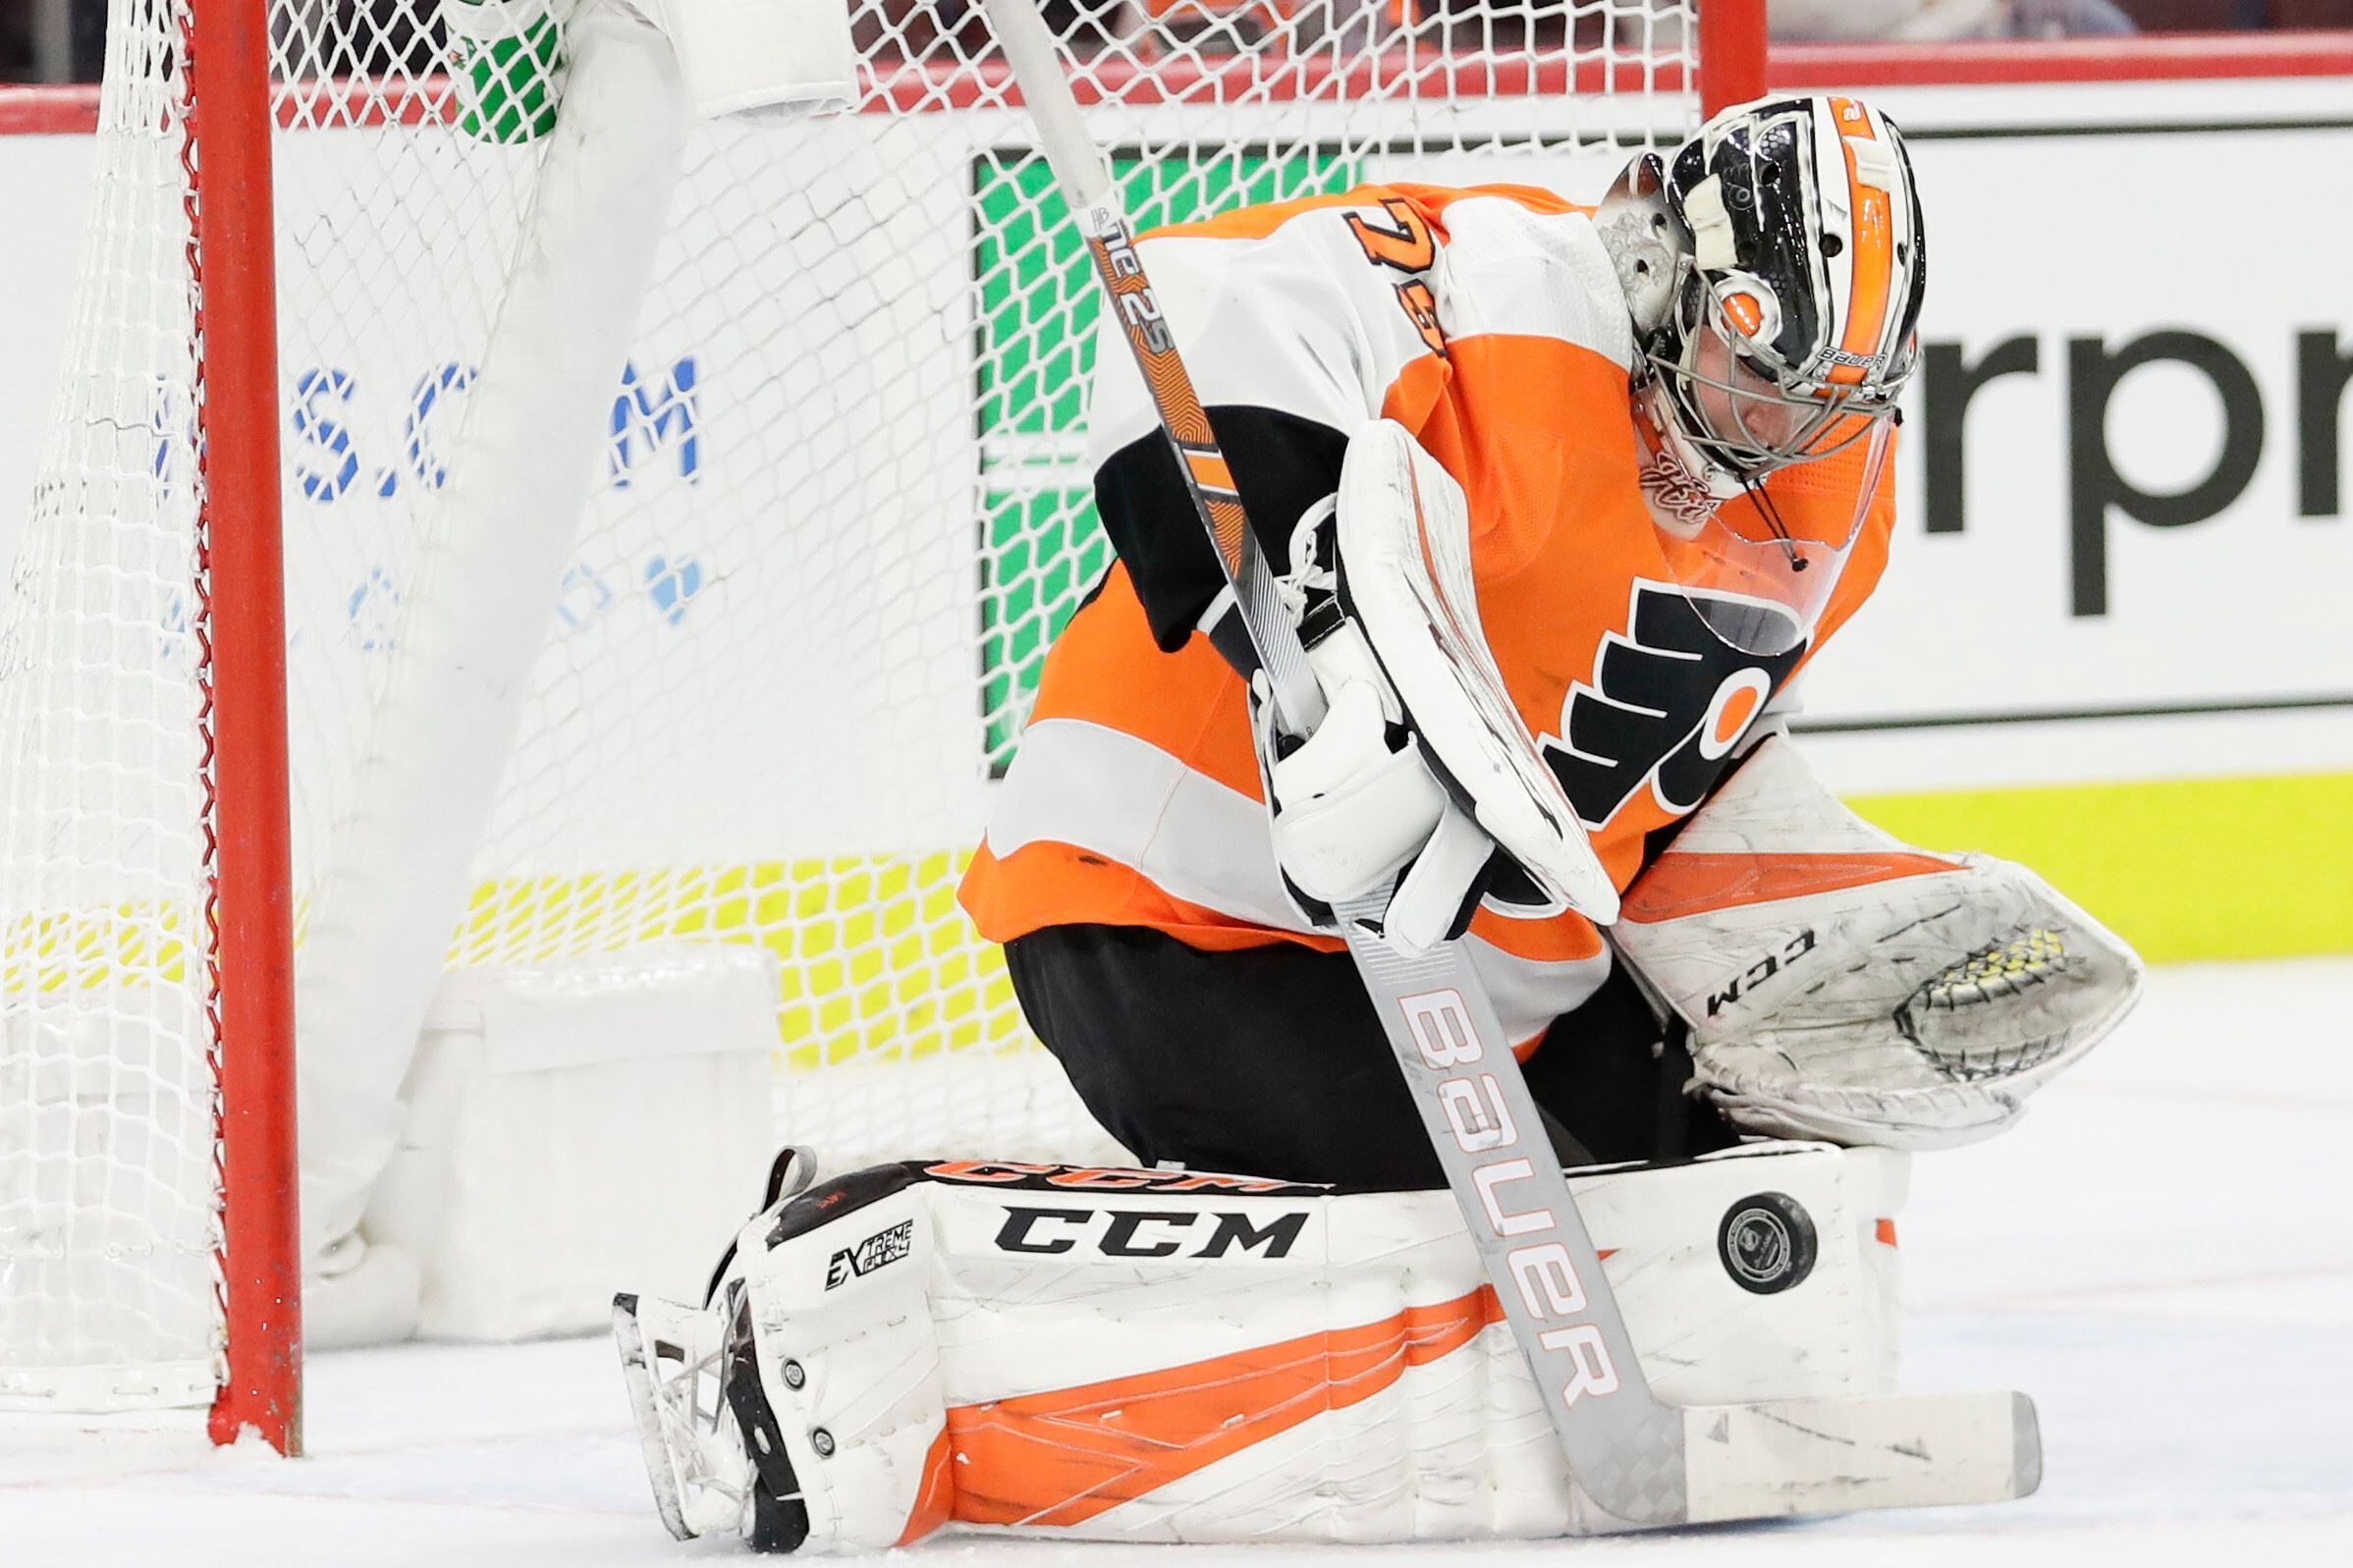 Undefeated goalie Carter Hart 'has been a key' to the Flyers' early success